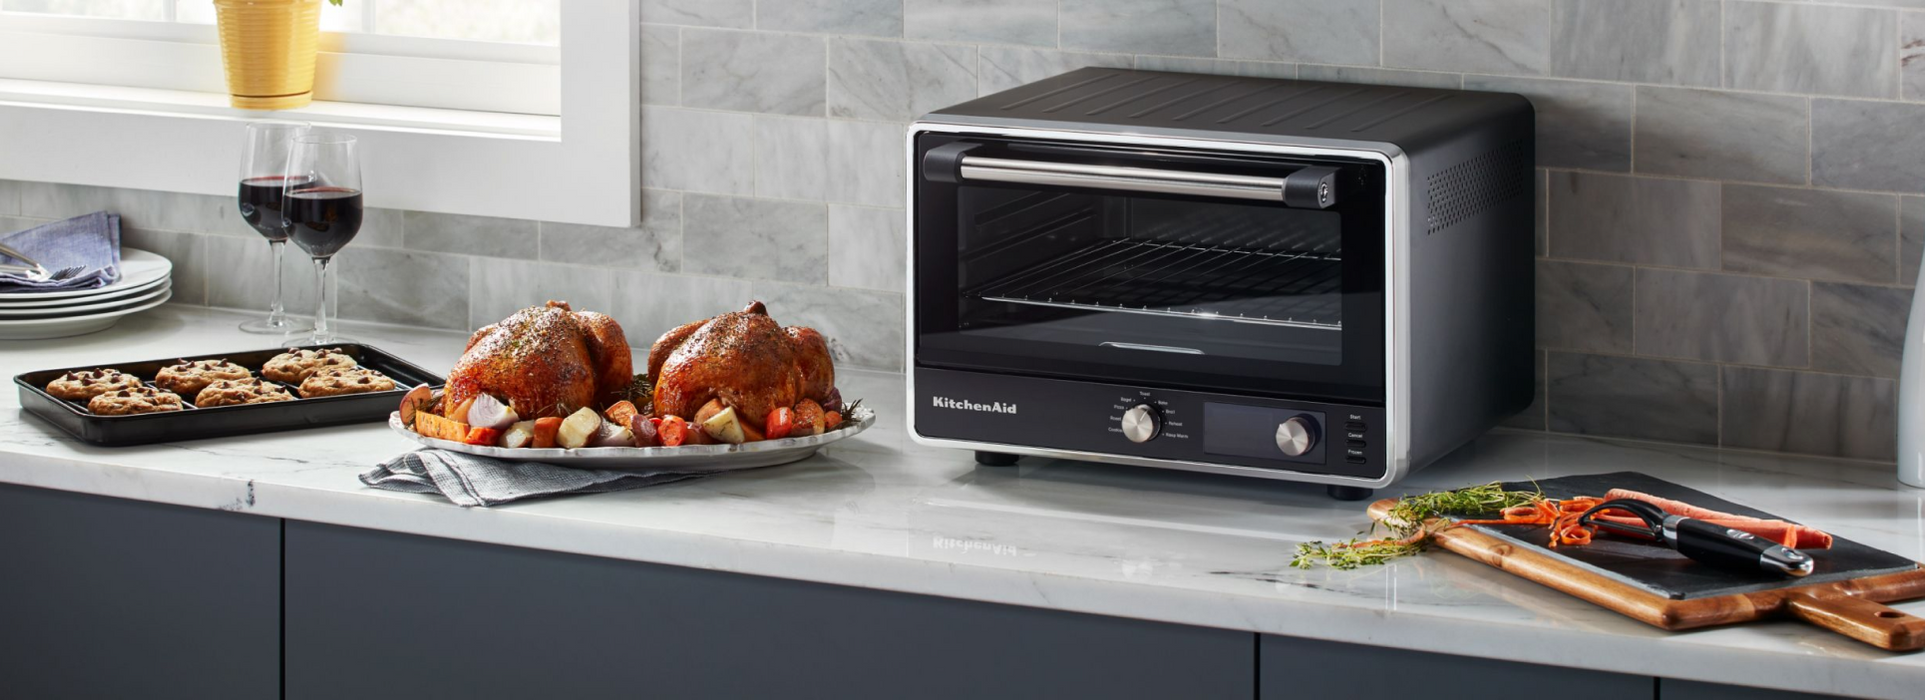 Saving Energy with Energy-Efficient Smart Toaster Oven